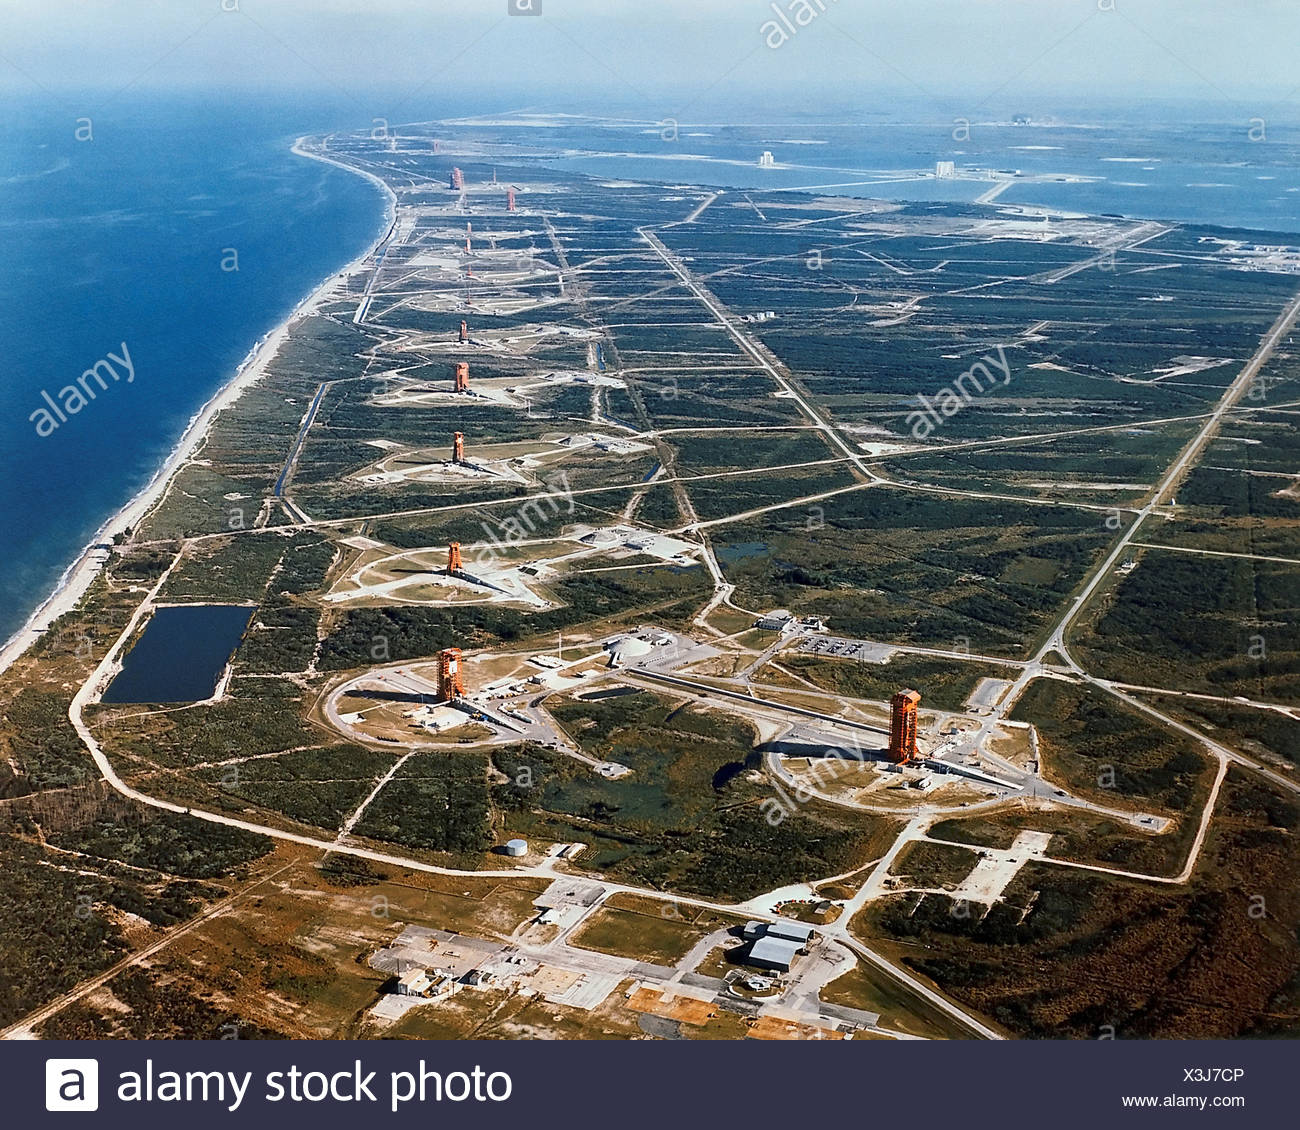 Cape Canaveral Aerial View